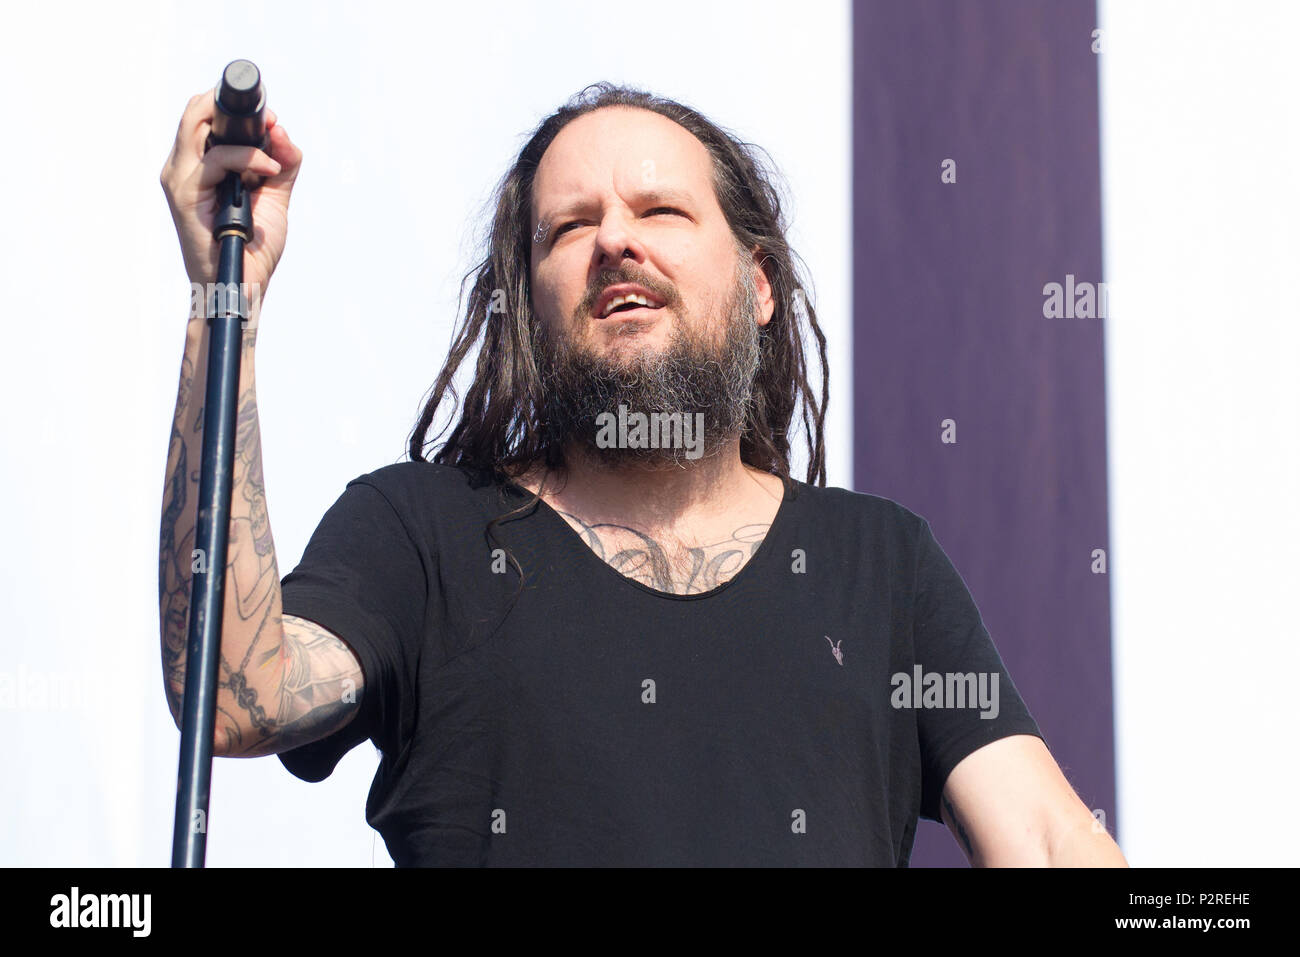 Florence Italy 16th Jun 18 Jonathan Davis Leader Of Korn Performed In Florence Now At Firenze Rocks 18 Main Stage Credit Denis Ulliana Alamy Live News Stock Photo Alamy